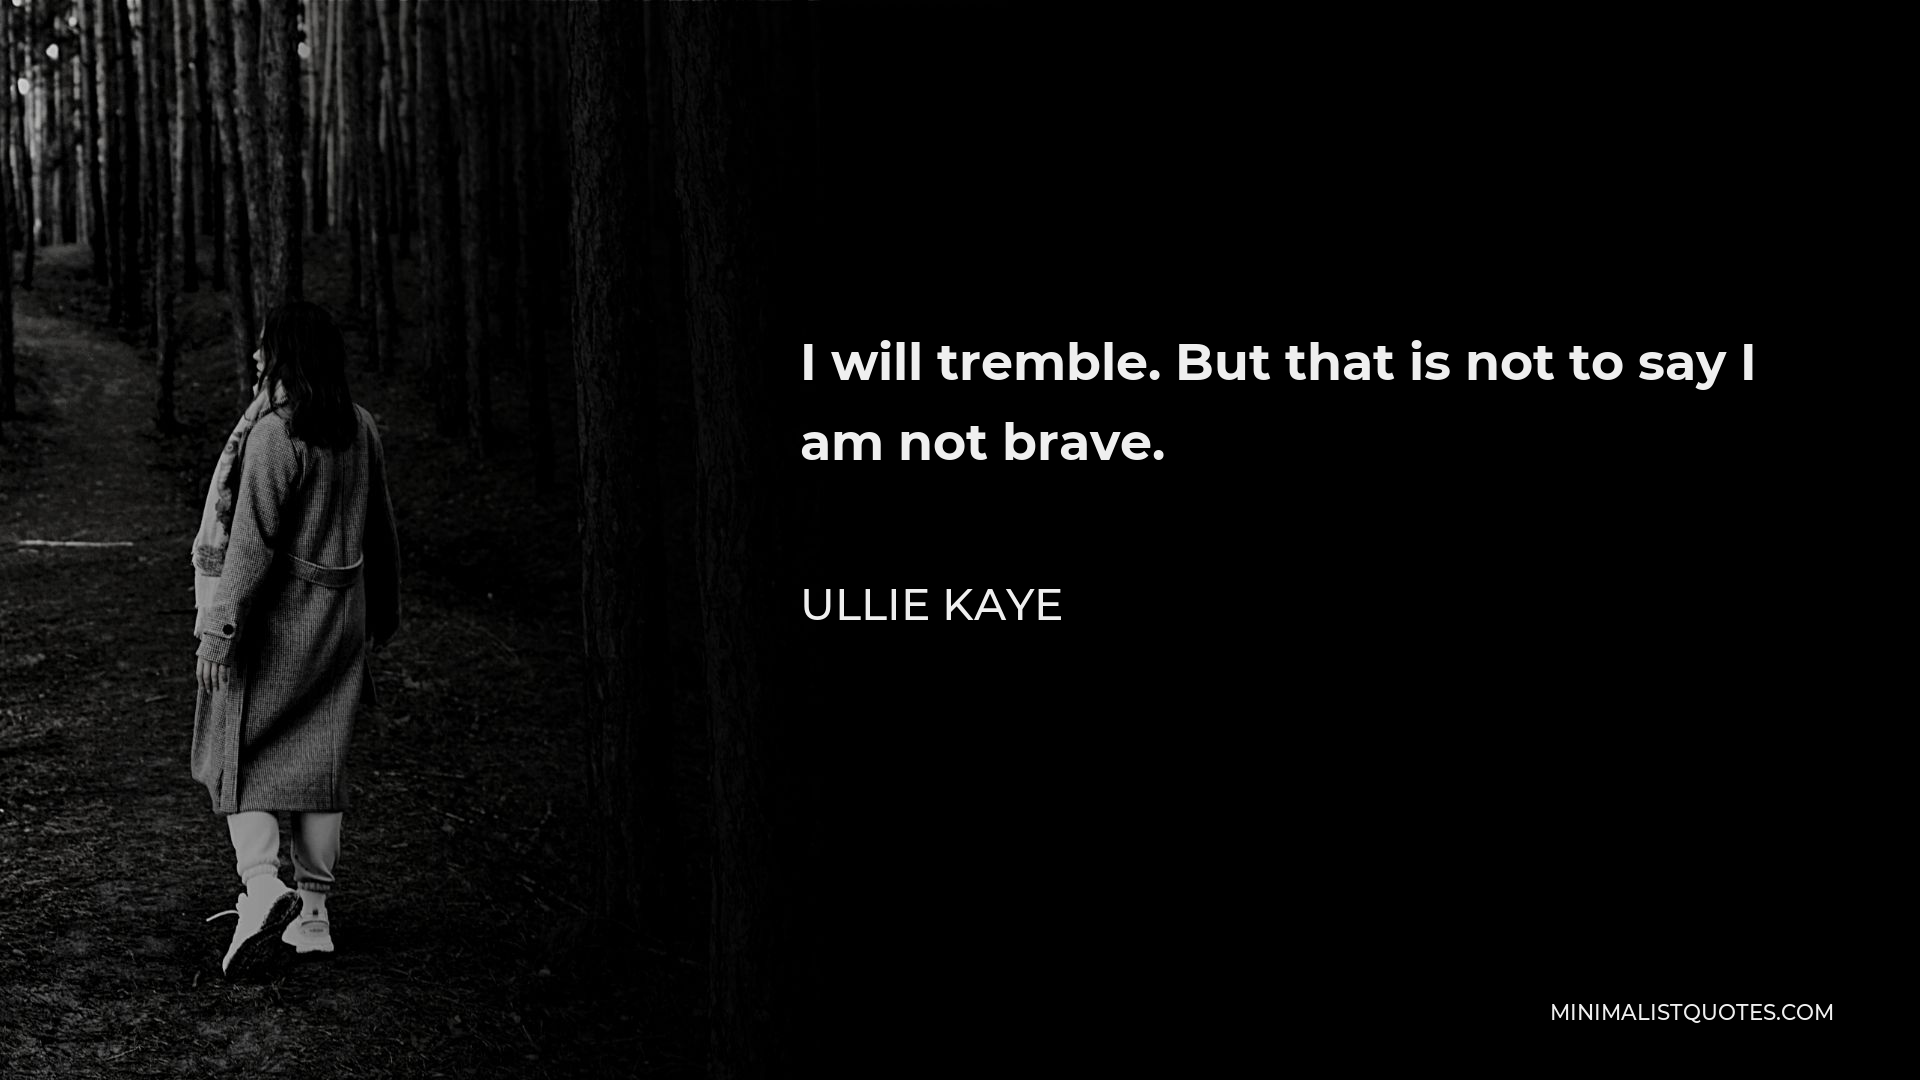 Ullie Kaye Quote - I will tremble. But that is not to say I am not brave.